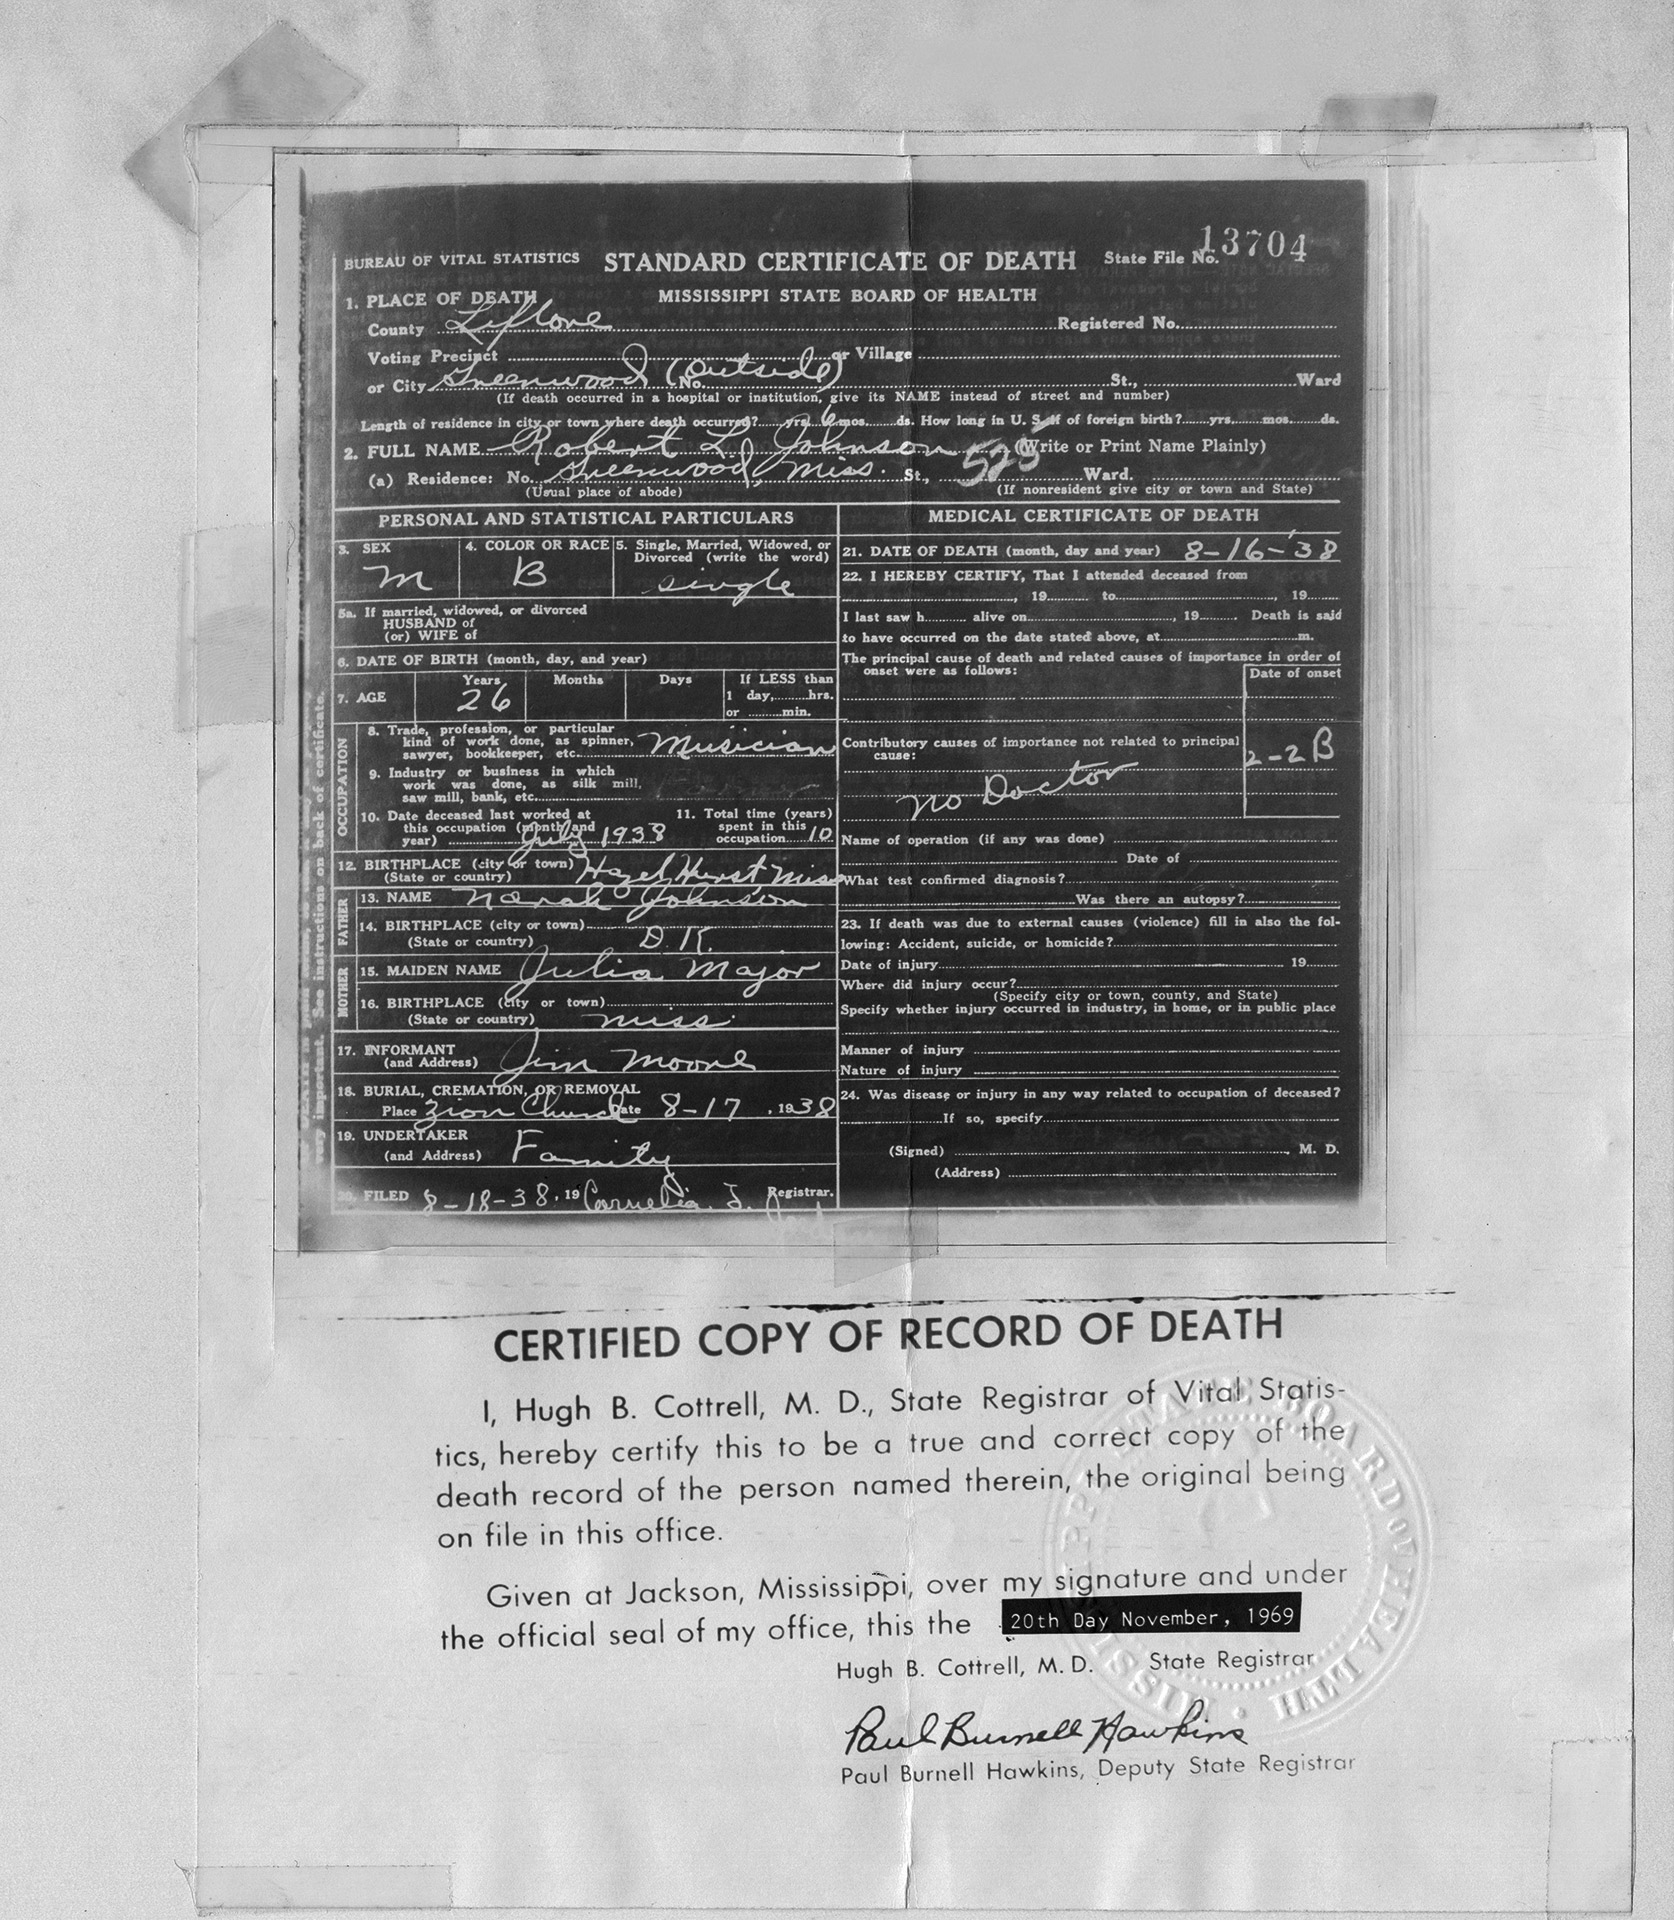 McCormick's copy of Robert Johnson's death certificate (courtesy of Susannah Nix from the Robert “Mack” McCormick Collection, Archives
Center, National Museum of American History)